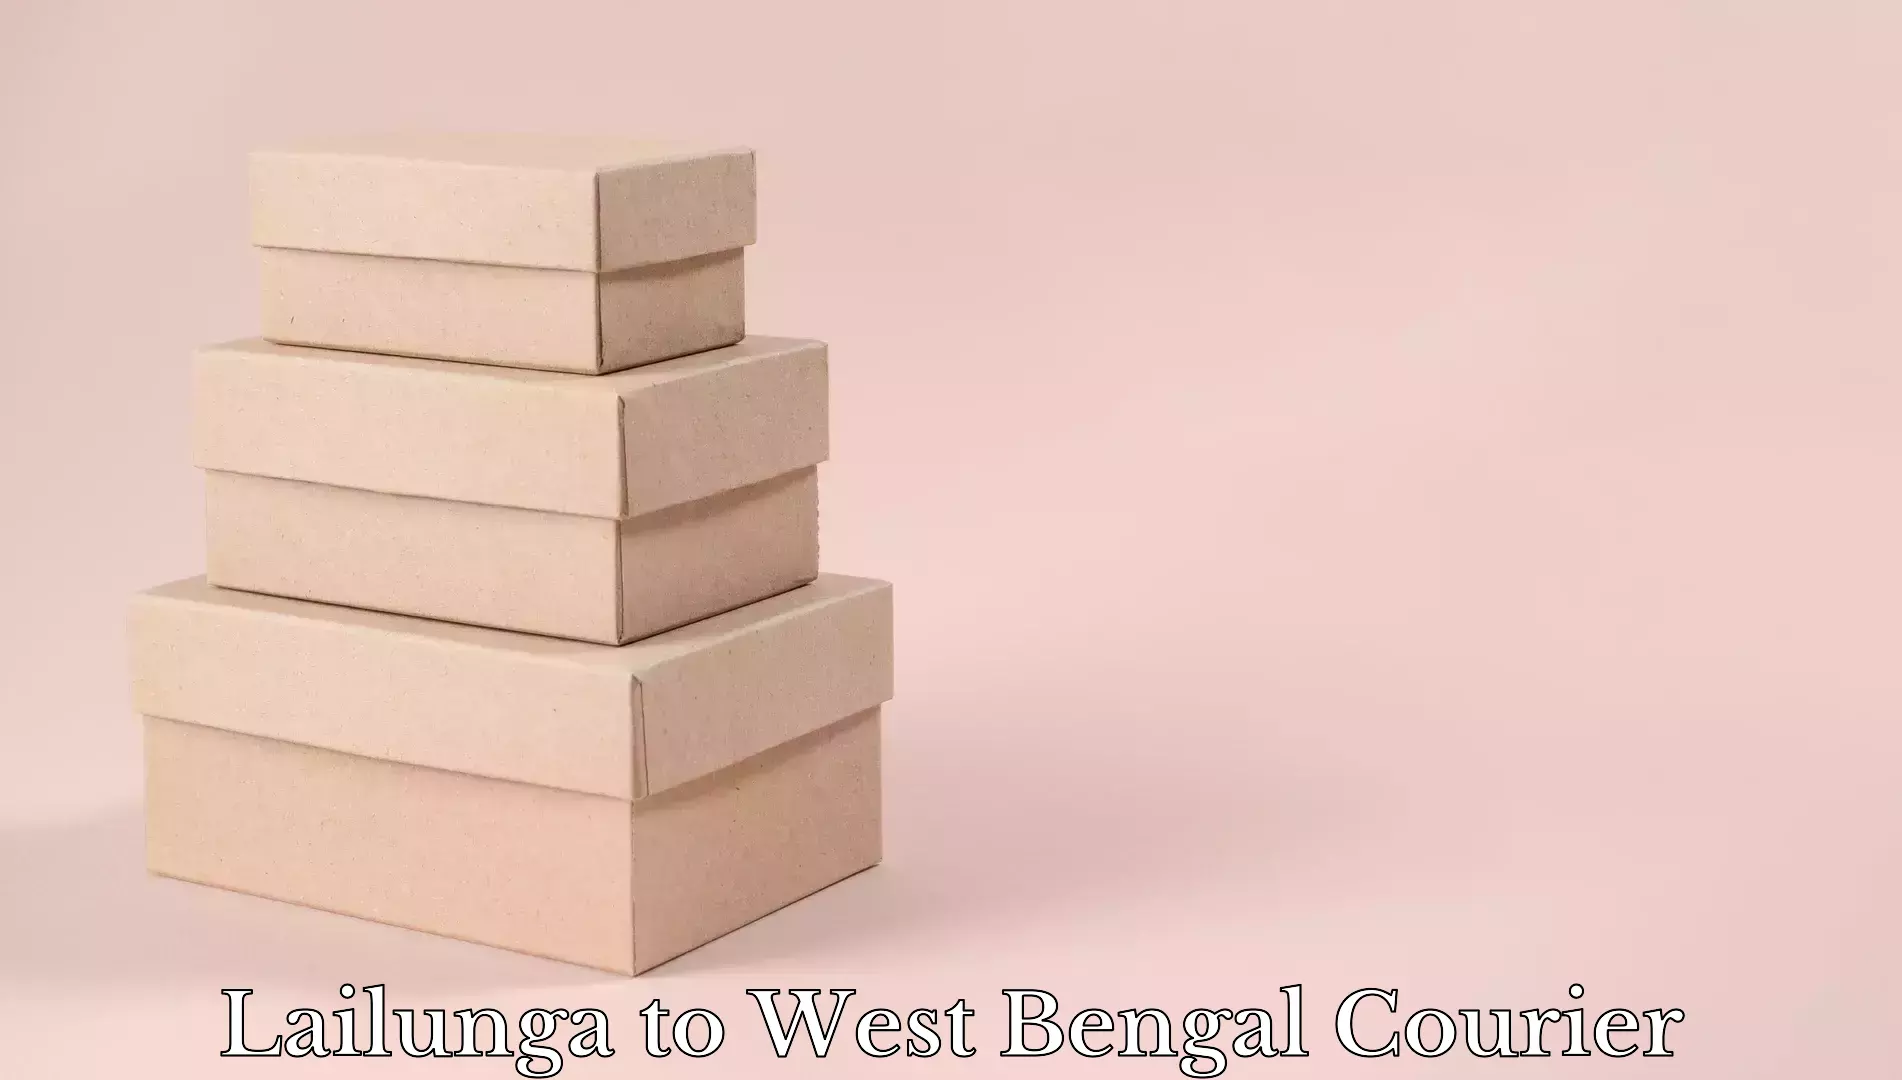 Luggage delivery optimization Lailunga to West Bengal